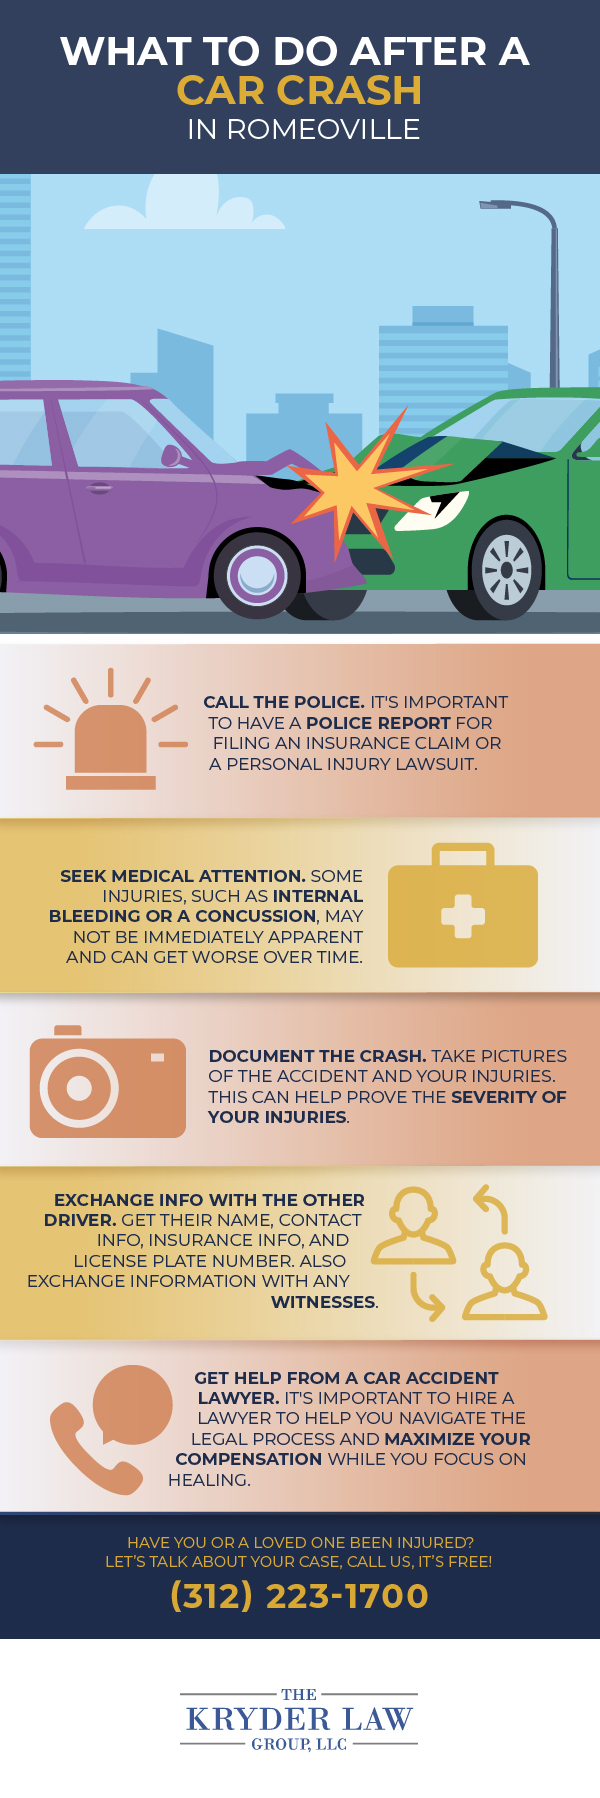 The Benefits of Hiring a Romeoville Car Accident Lawyer Infographic